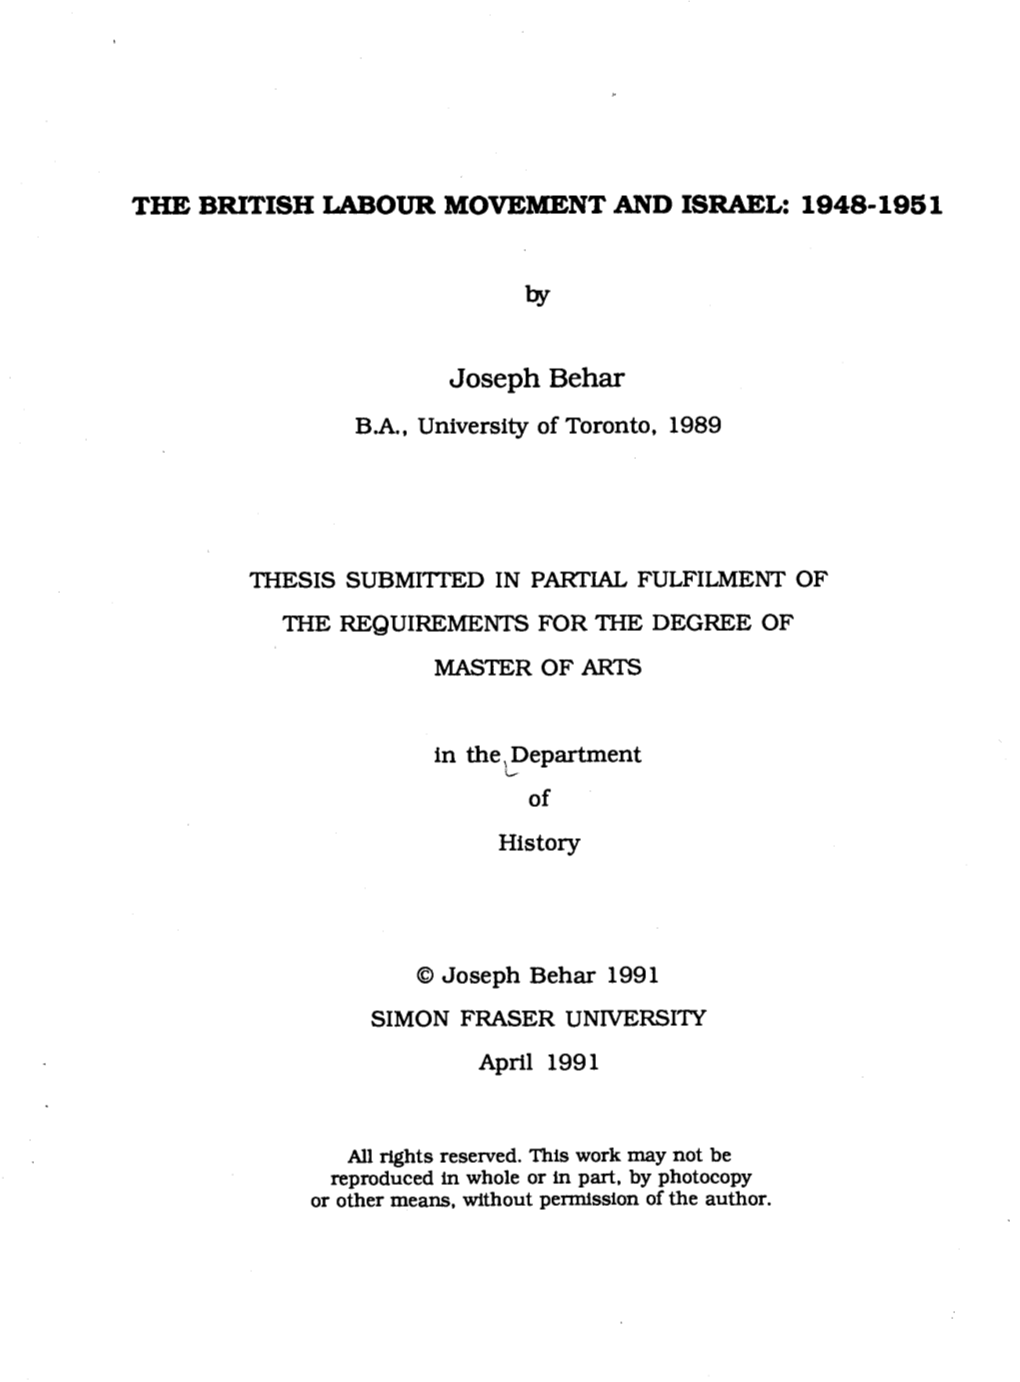 The British Labour Movement and Israel: 1948-1961